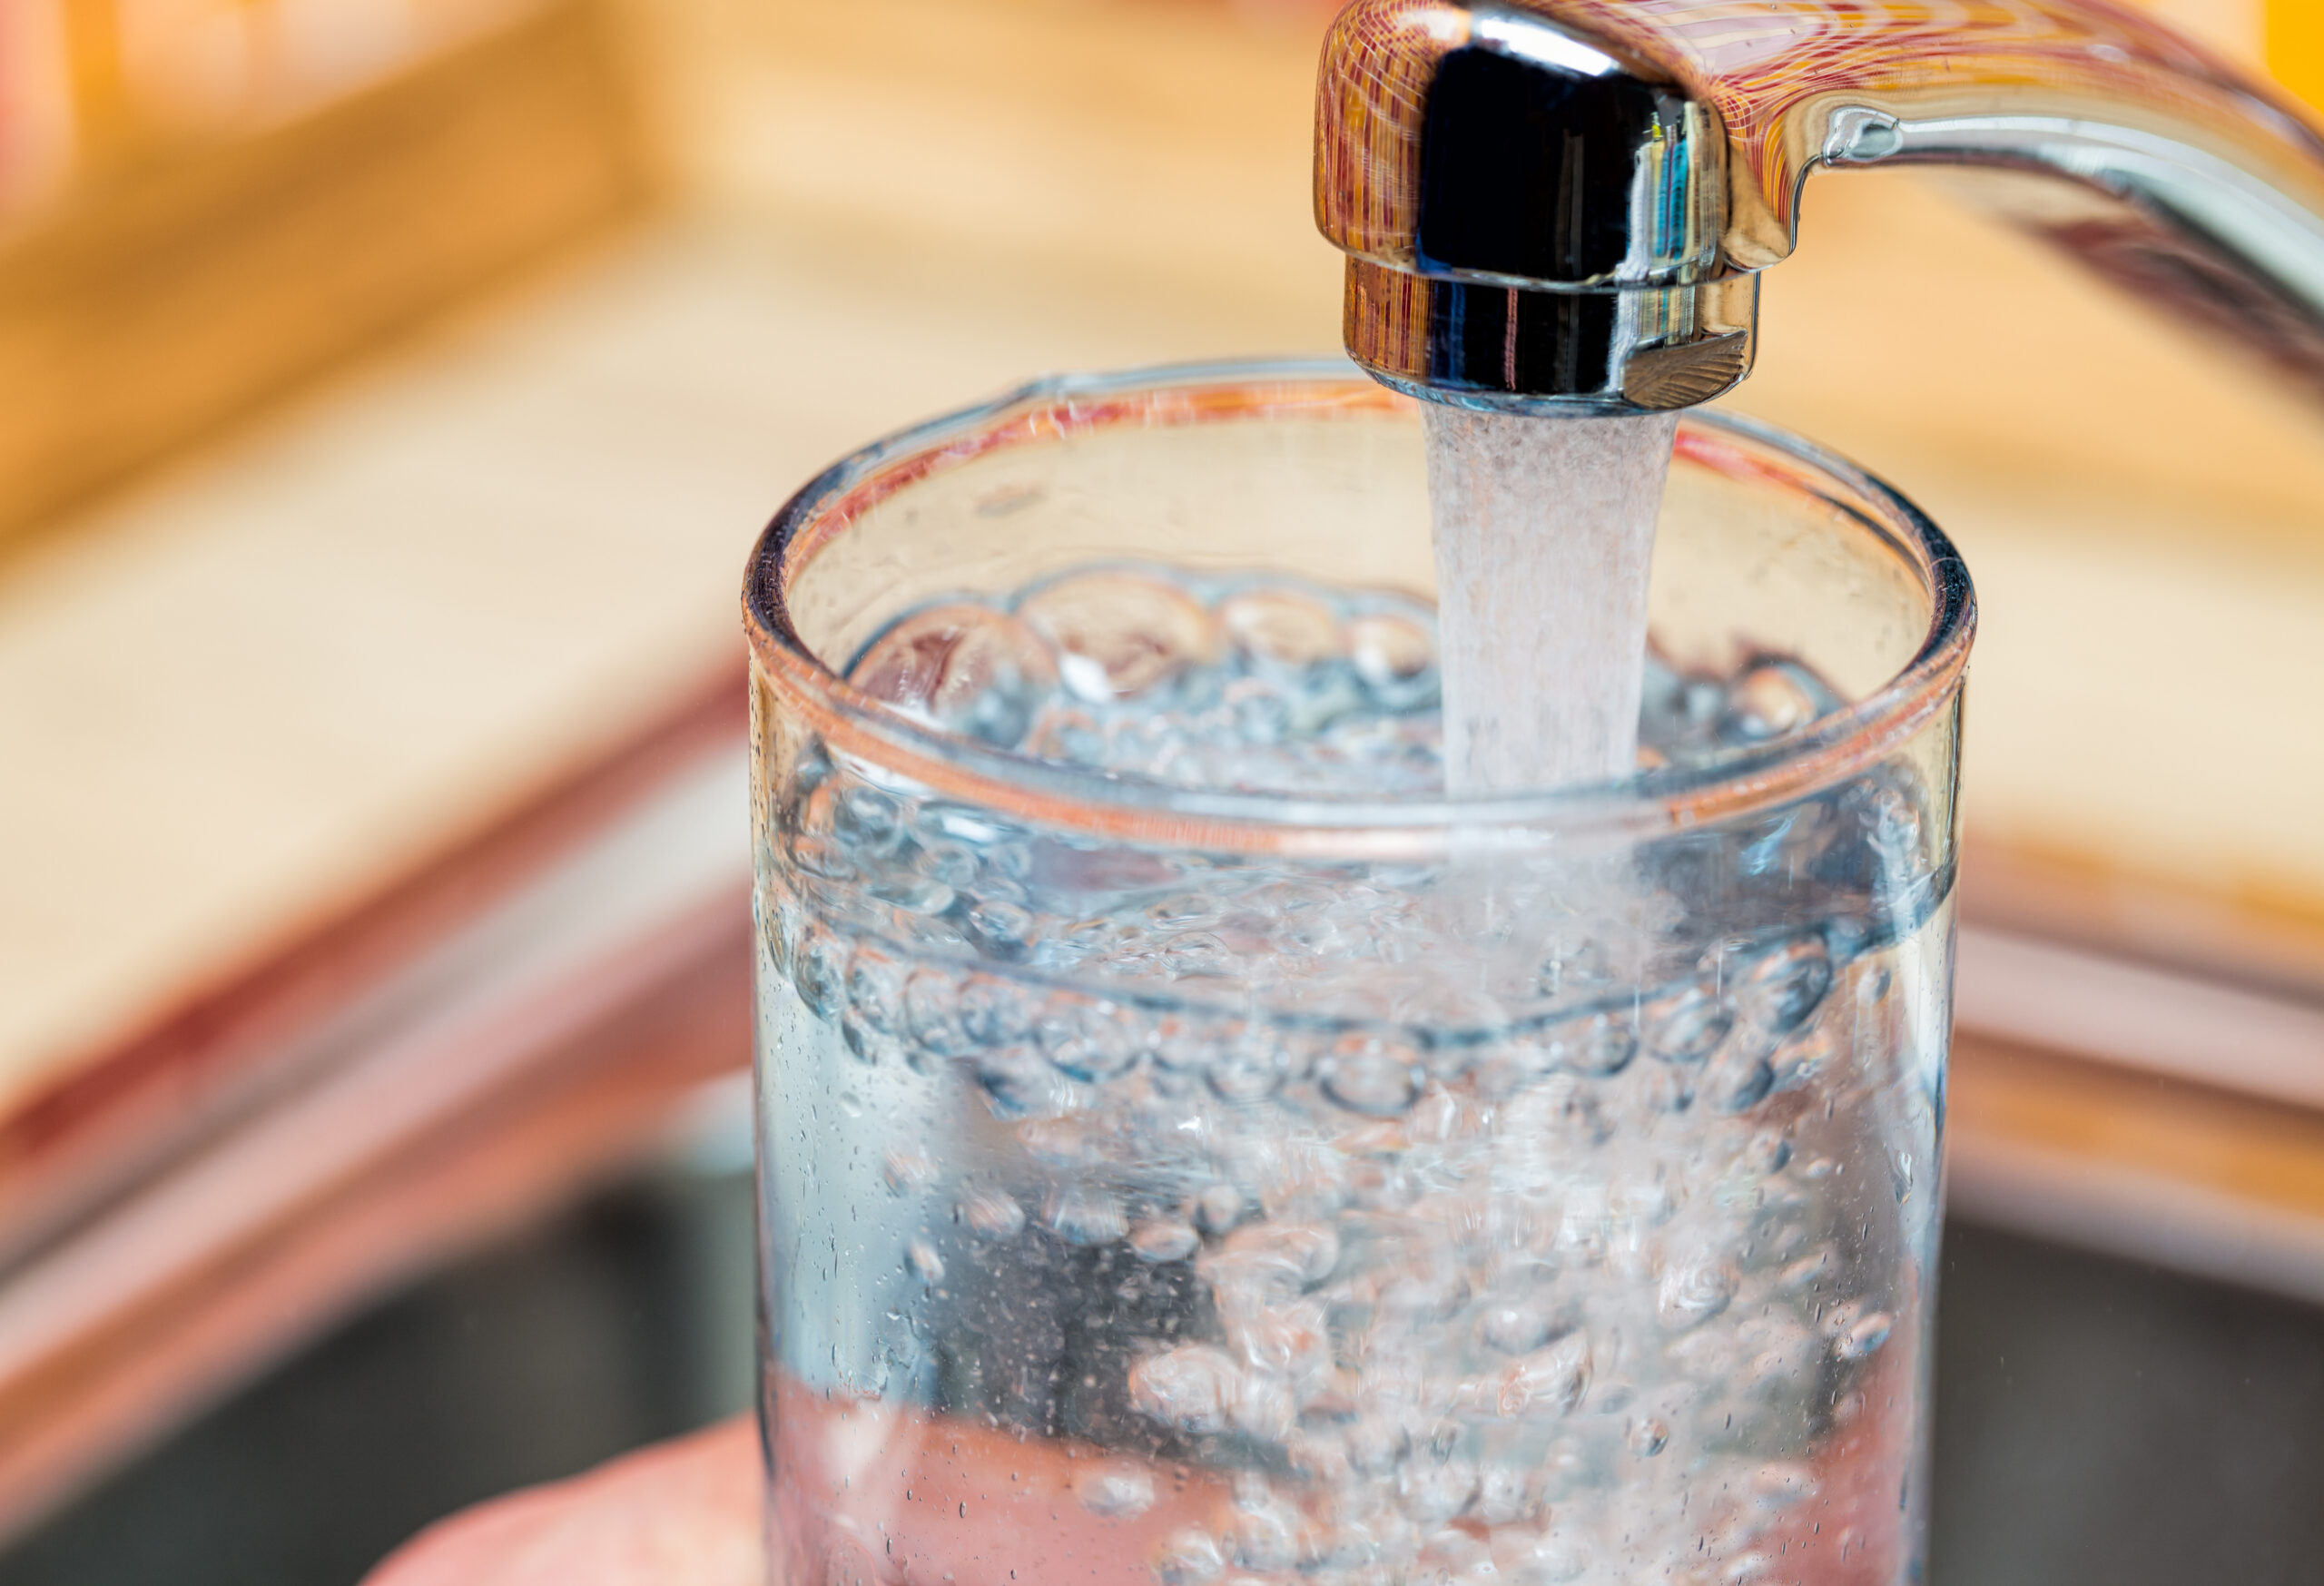 Drinking Fluoridated Water While Pregnant May Be Linked To Lower IQs